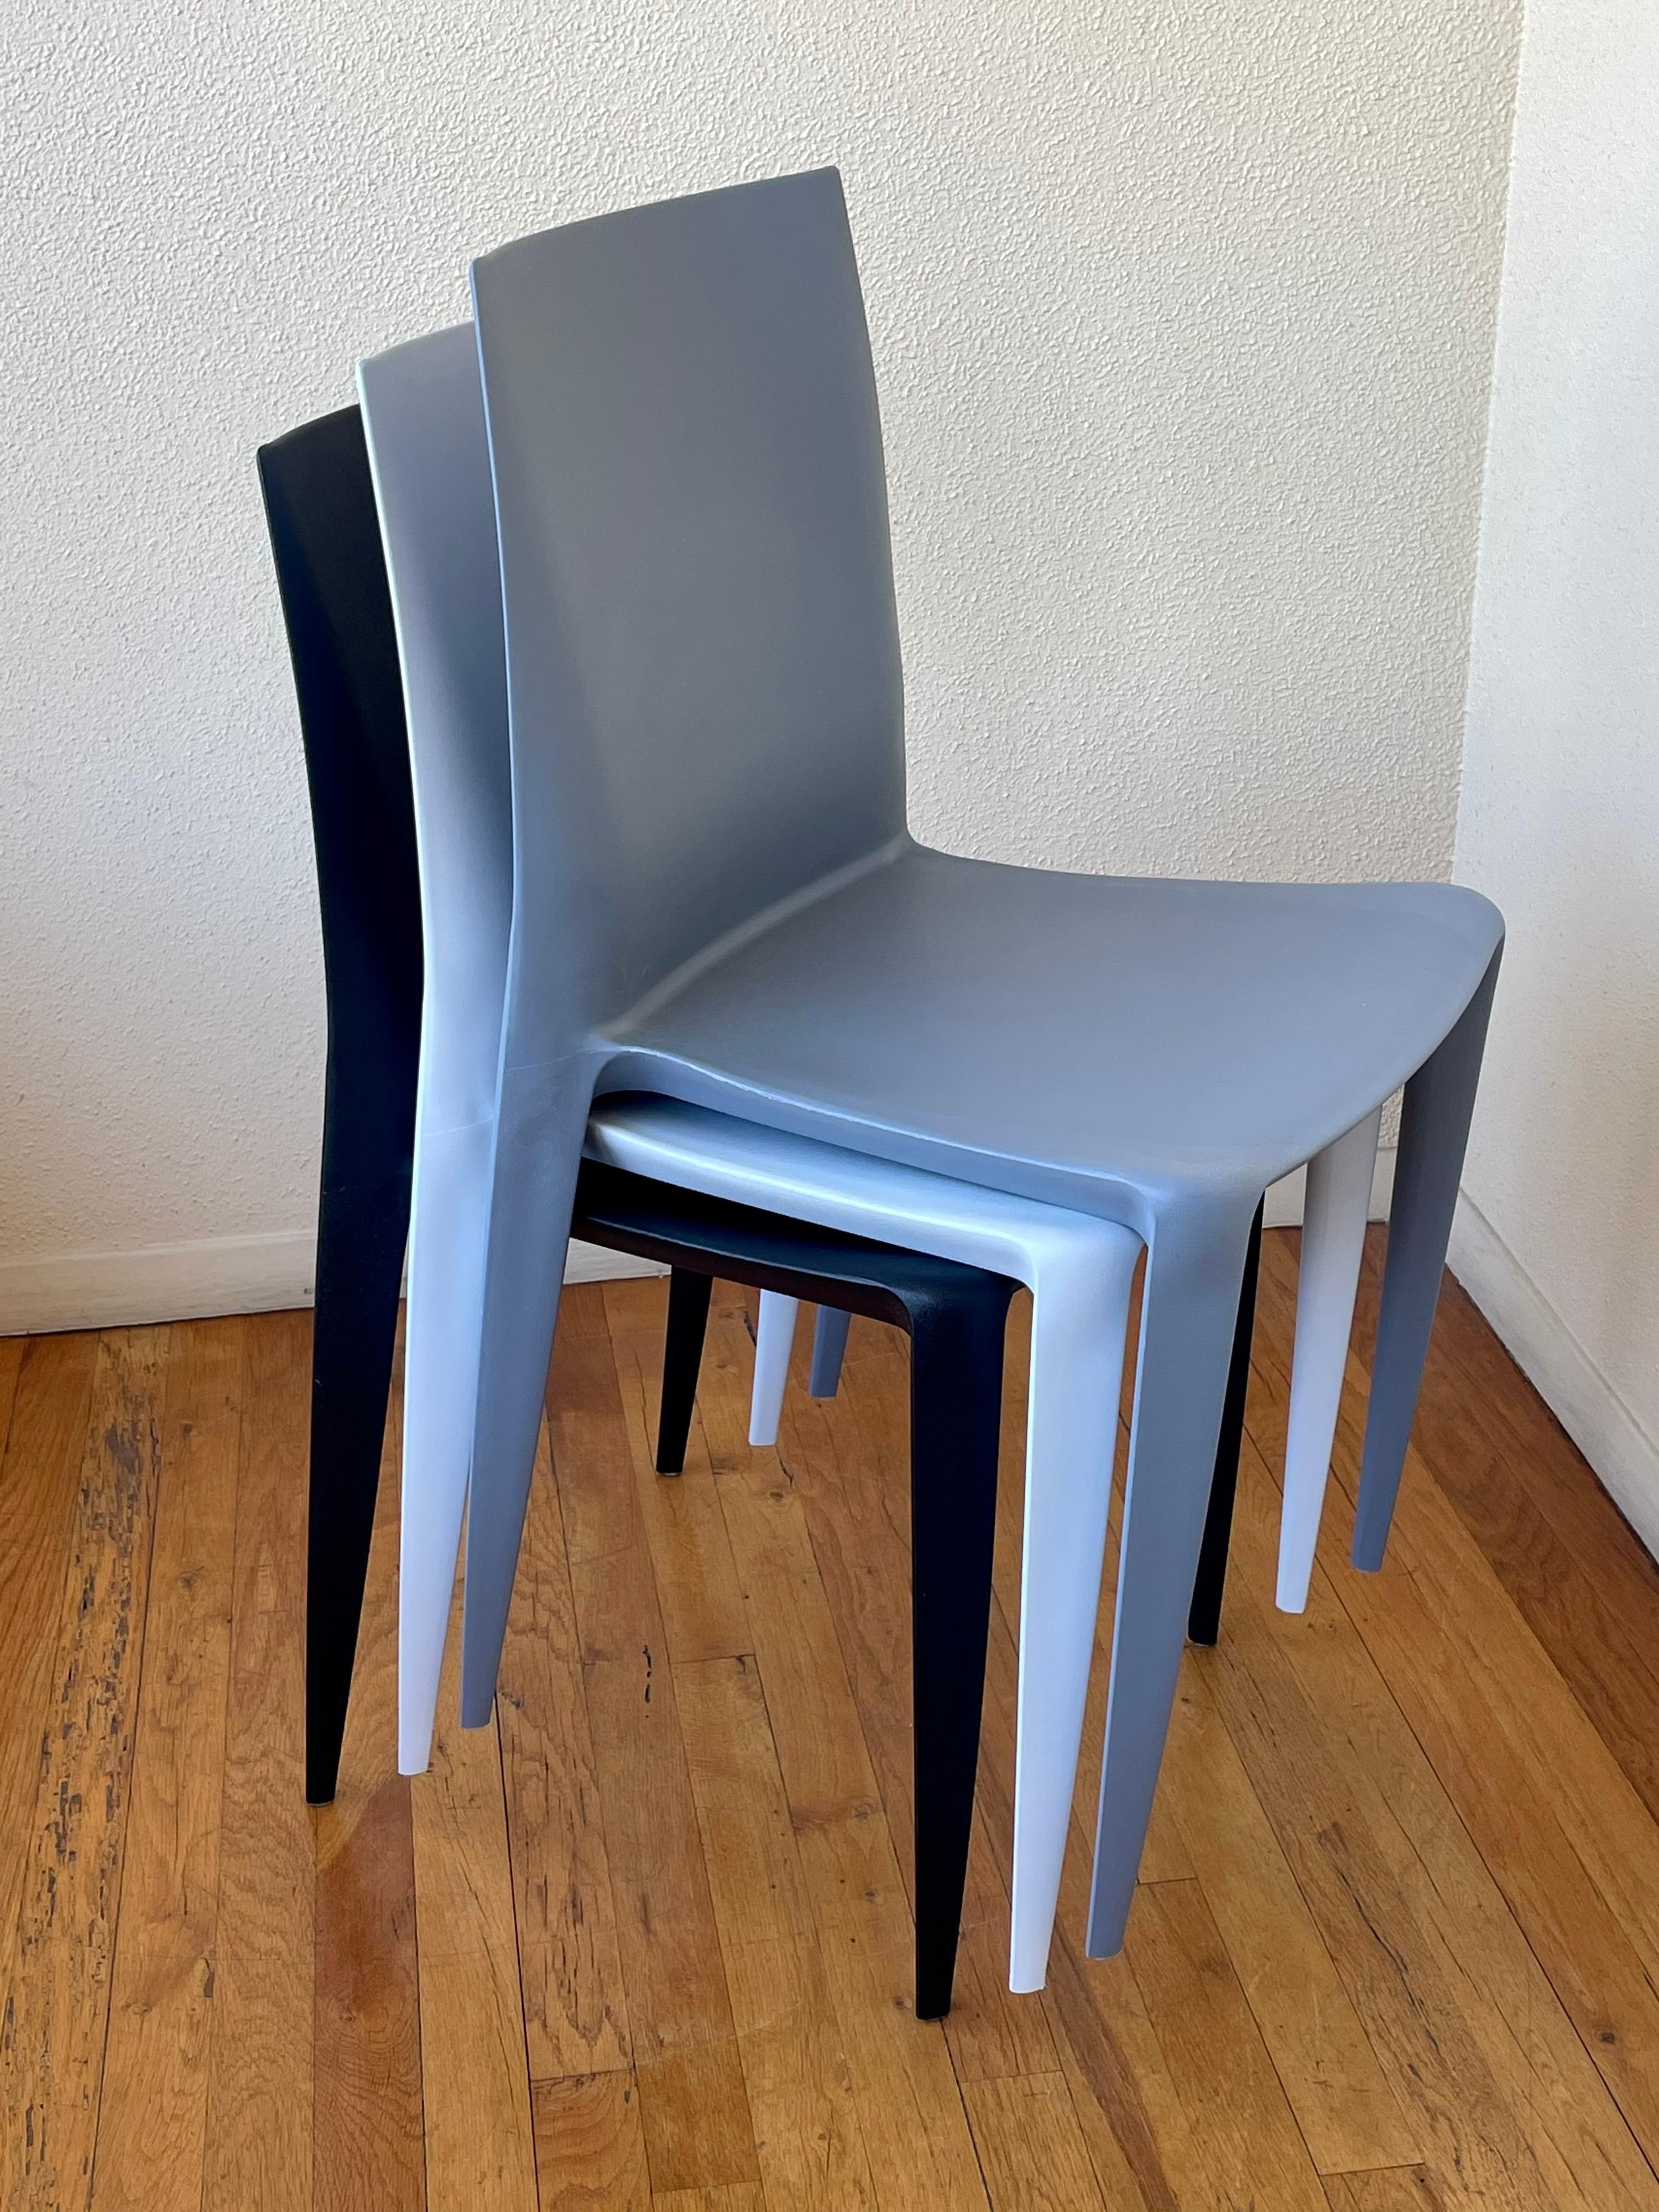 Nice set of 3 stackable chairs designed by Mario Bellini for Heller great colors and condition its like new, made in Italy. Grey, white & black.